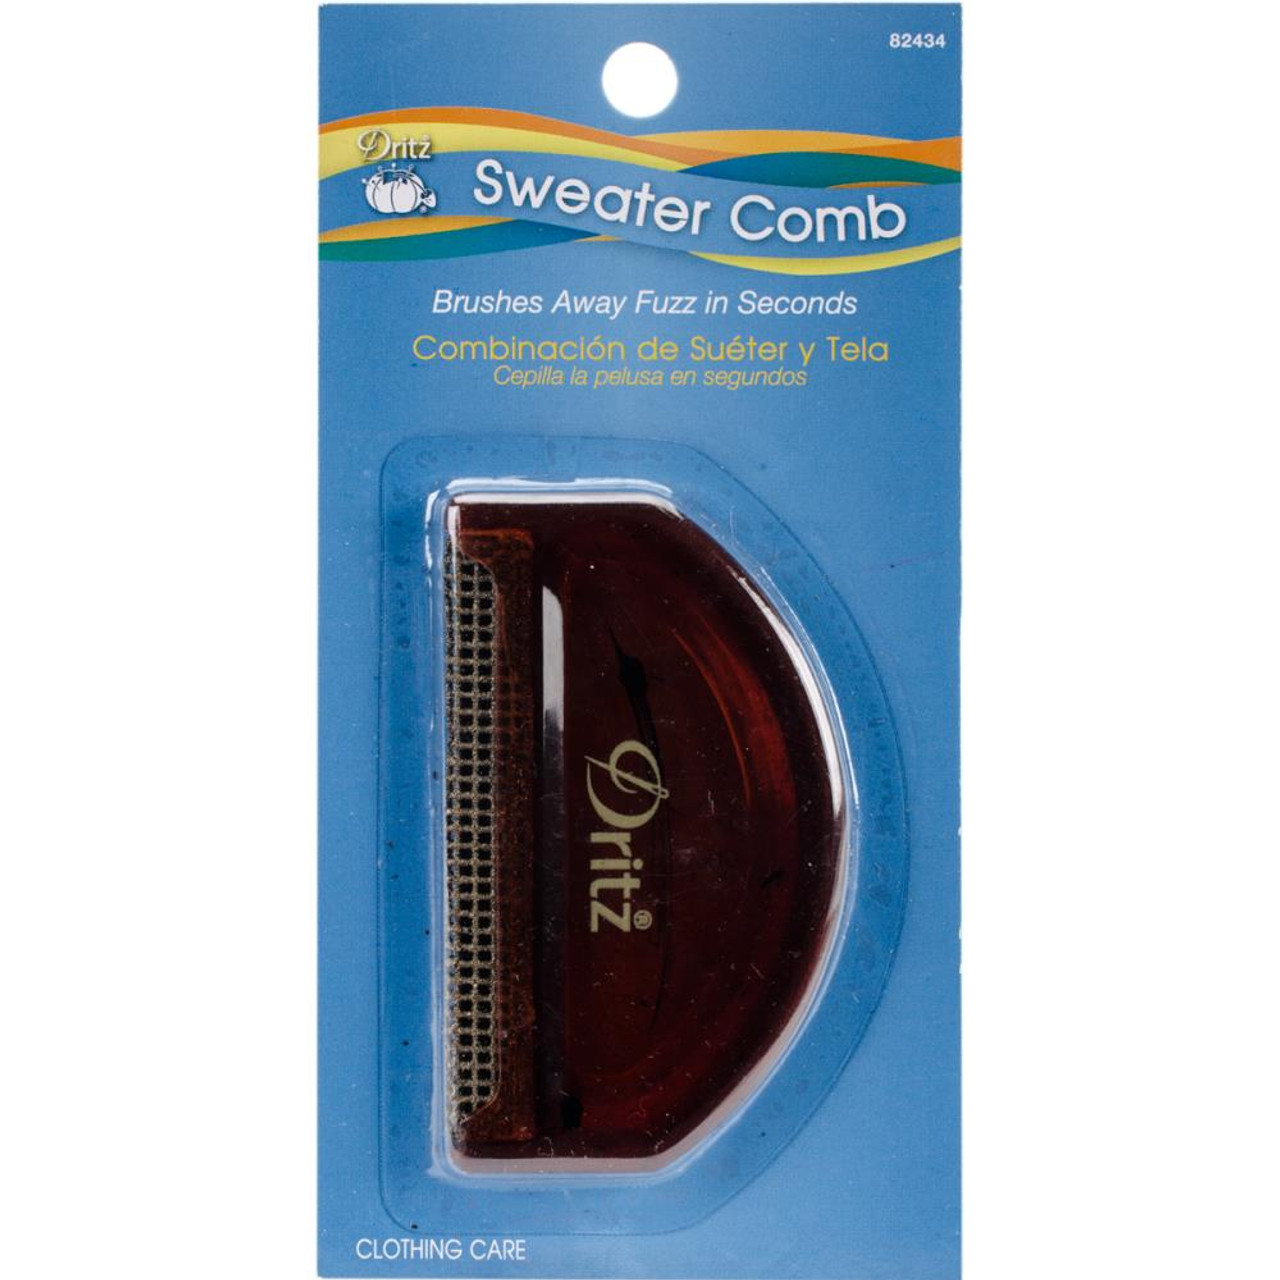 How To Use A Sweater Comb 